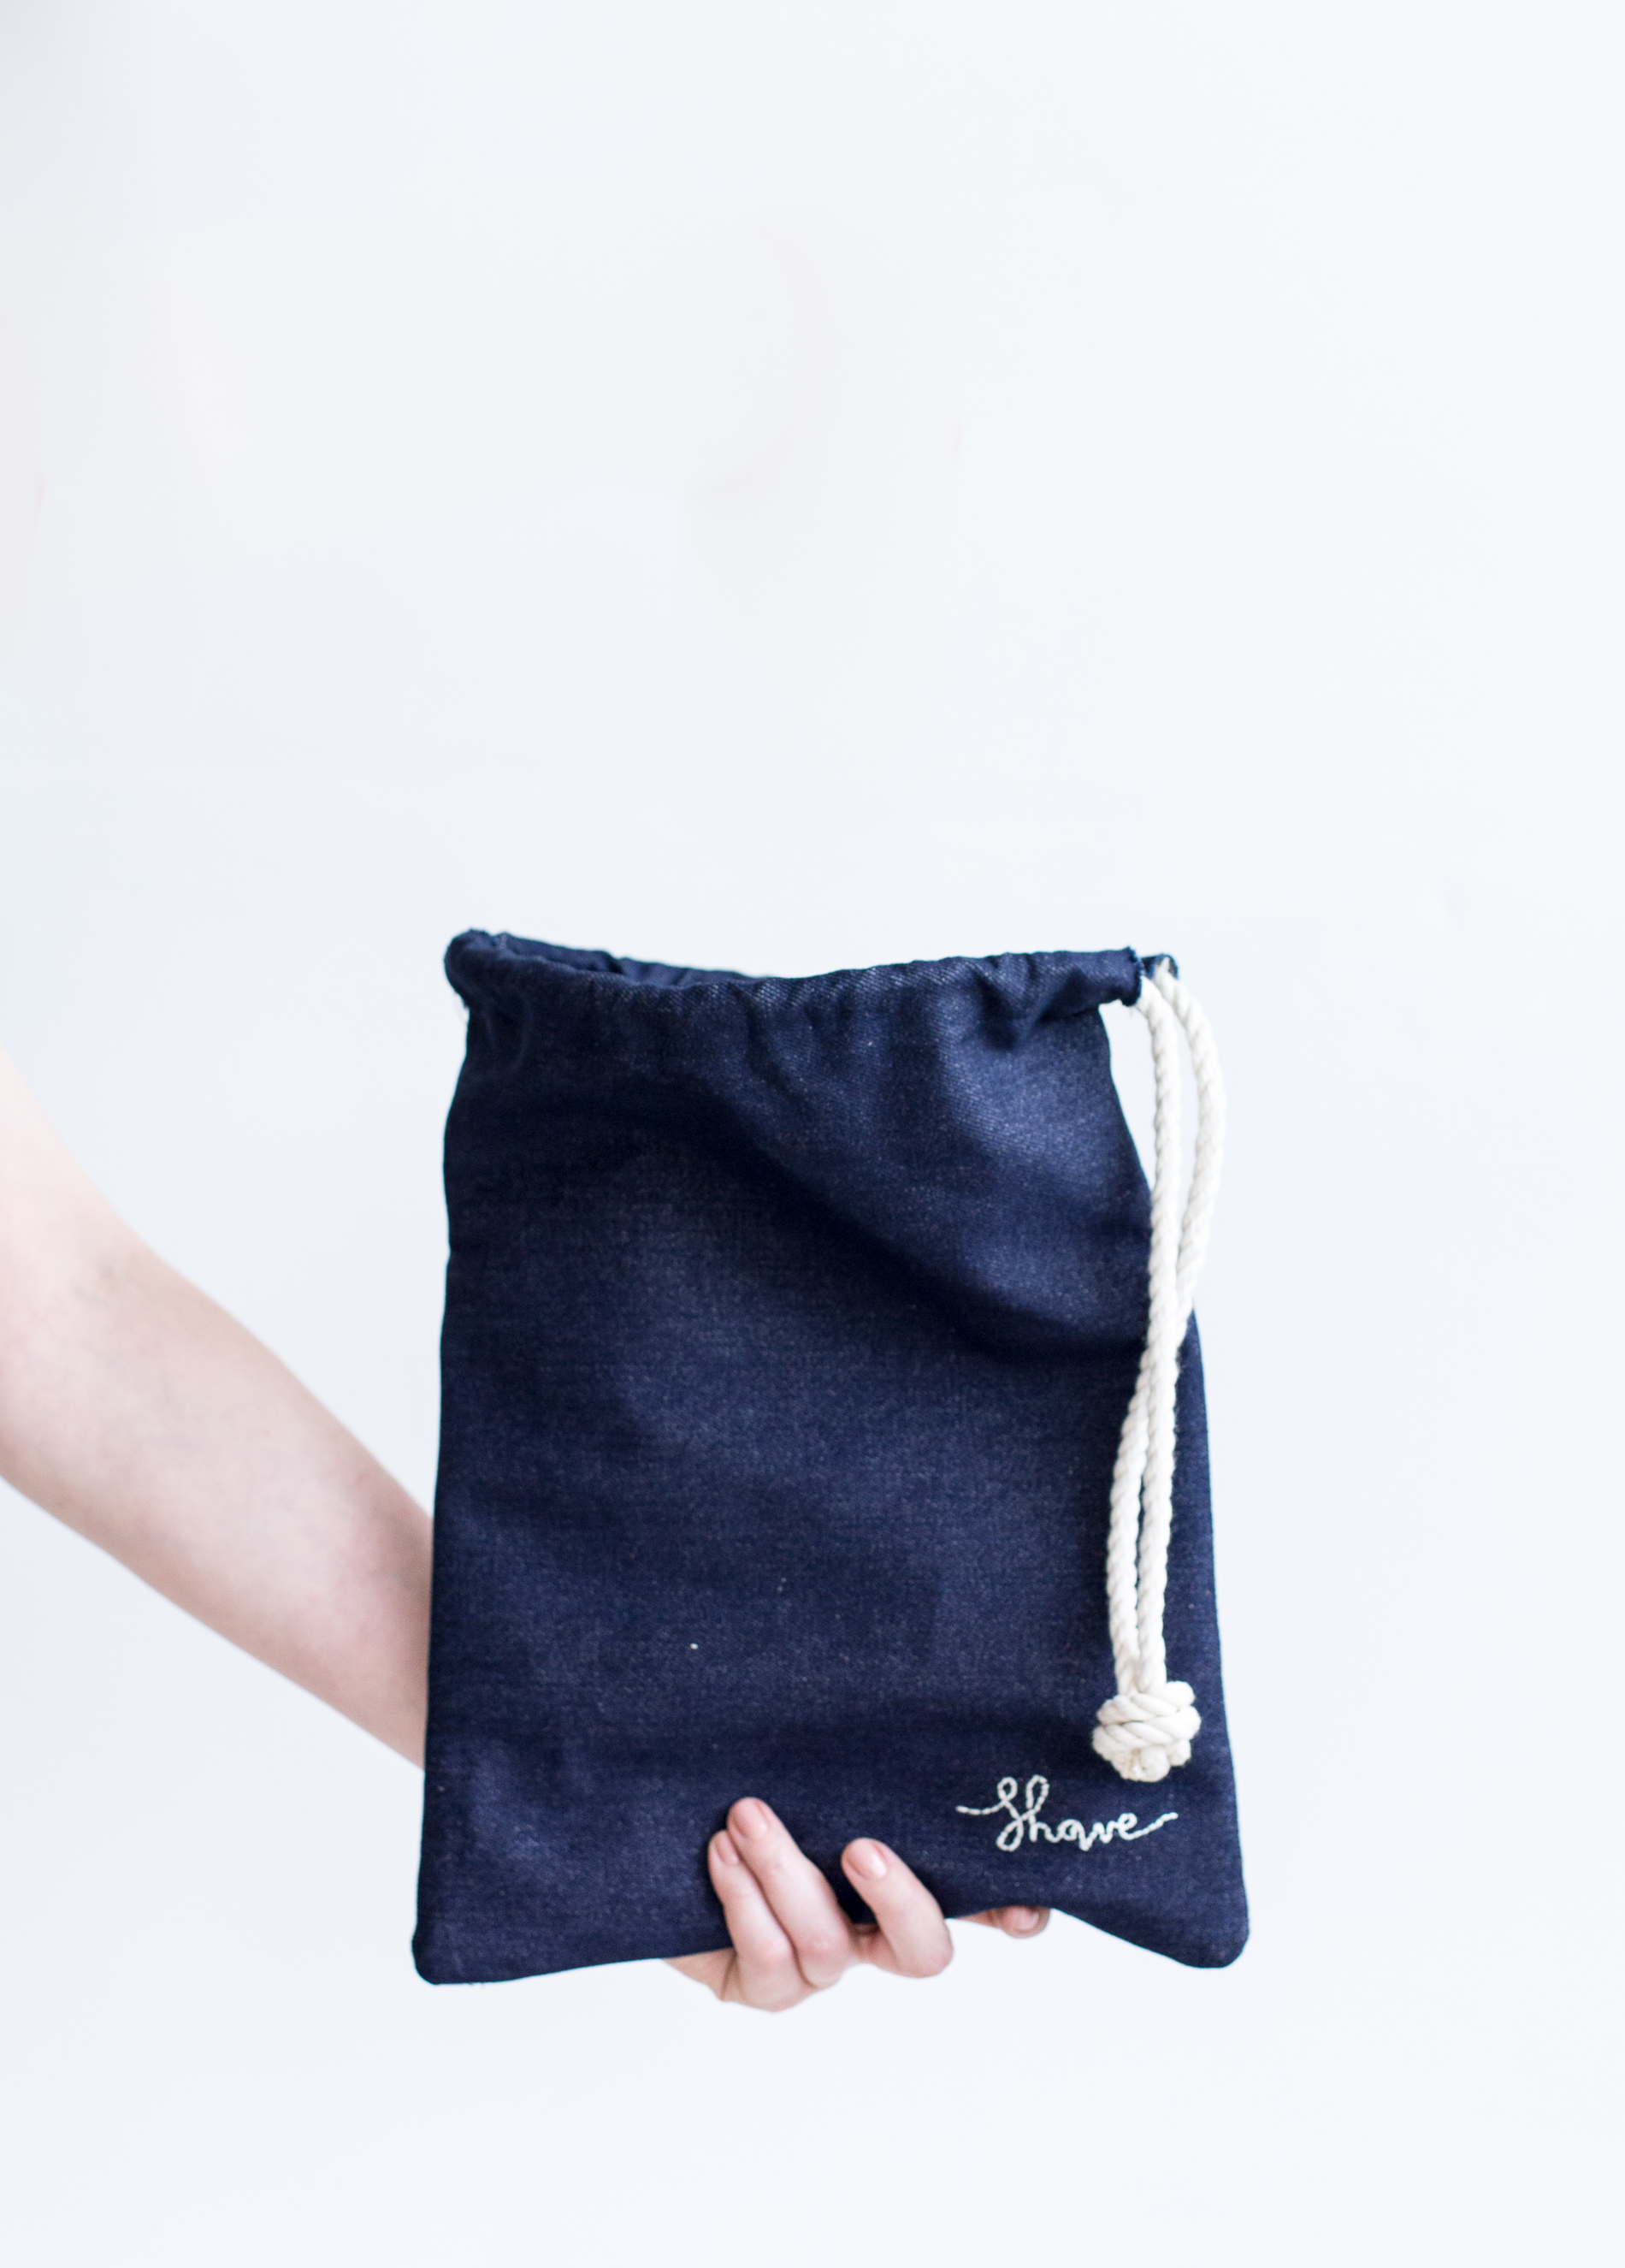 DIY unisex navy and rope toiletry bag for travelling